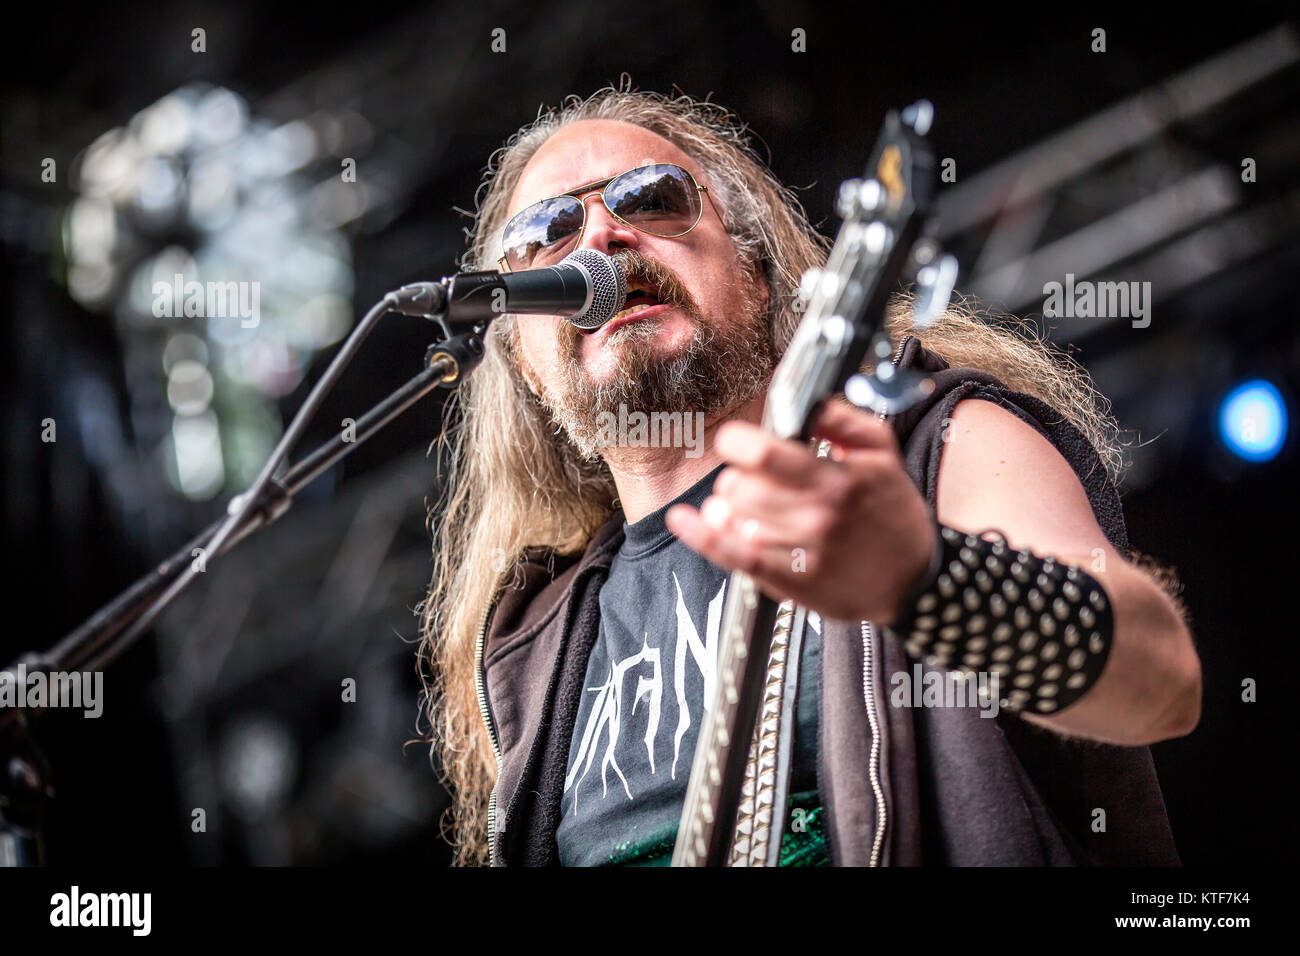 Norway, Borre – August 19, 2017. The Norwegian black metal band Aura Noir performs a live concert at during the Norwegian metal festival Midgardsblot Festival 2017 in Borre. Here vocalist and bassist Aggressor is seen live on stage. Stock Photo